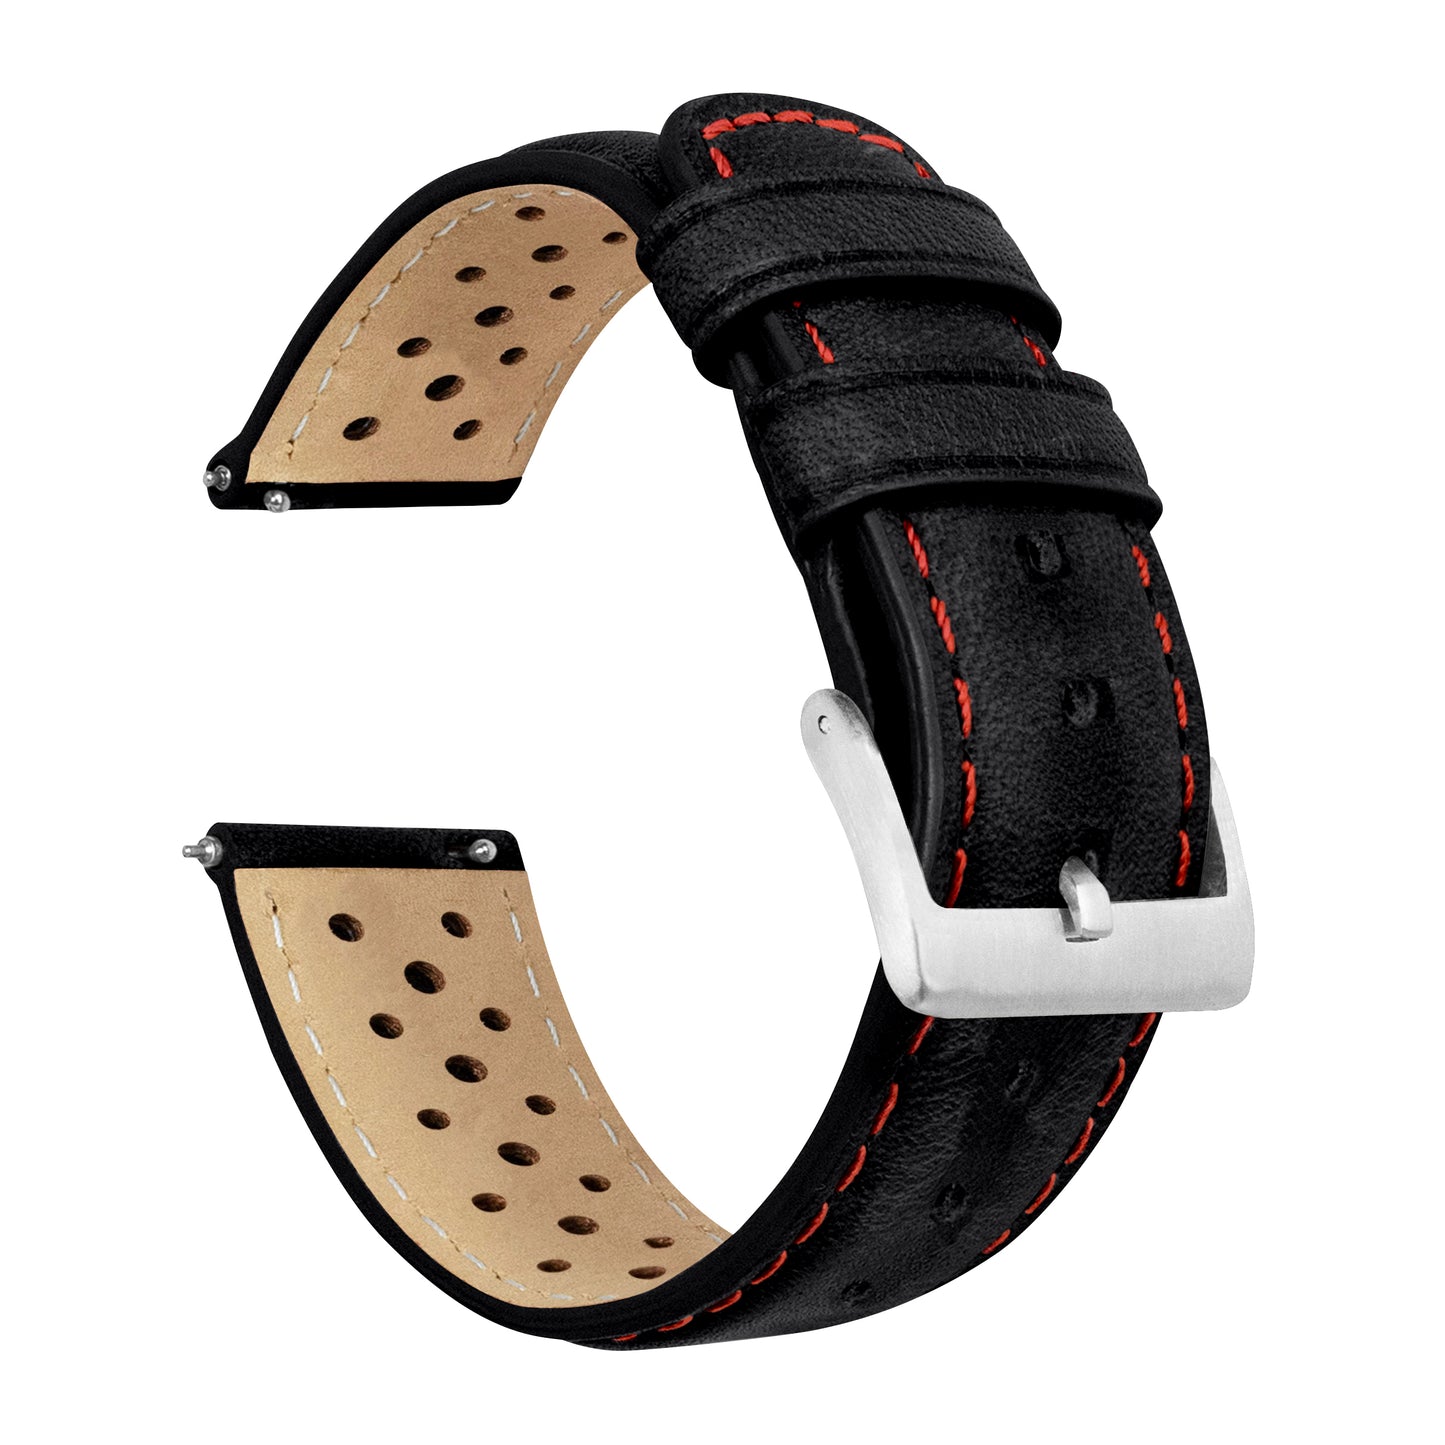 Samsung Galaxy Watch Active Racing Horween Leather Black Red Stitch Watch Band